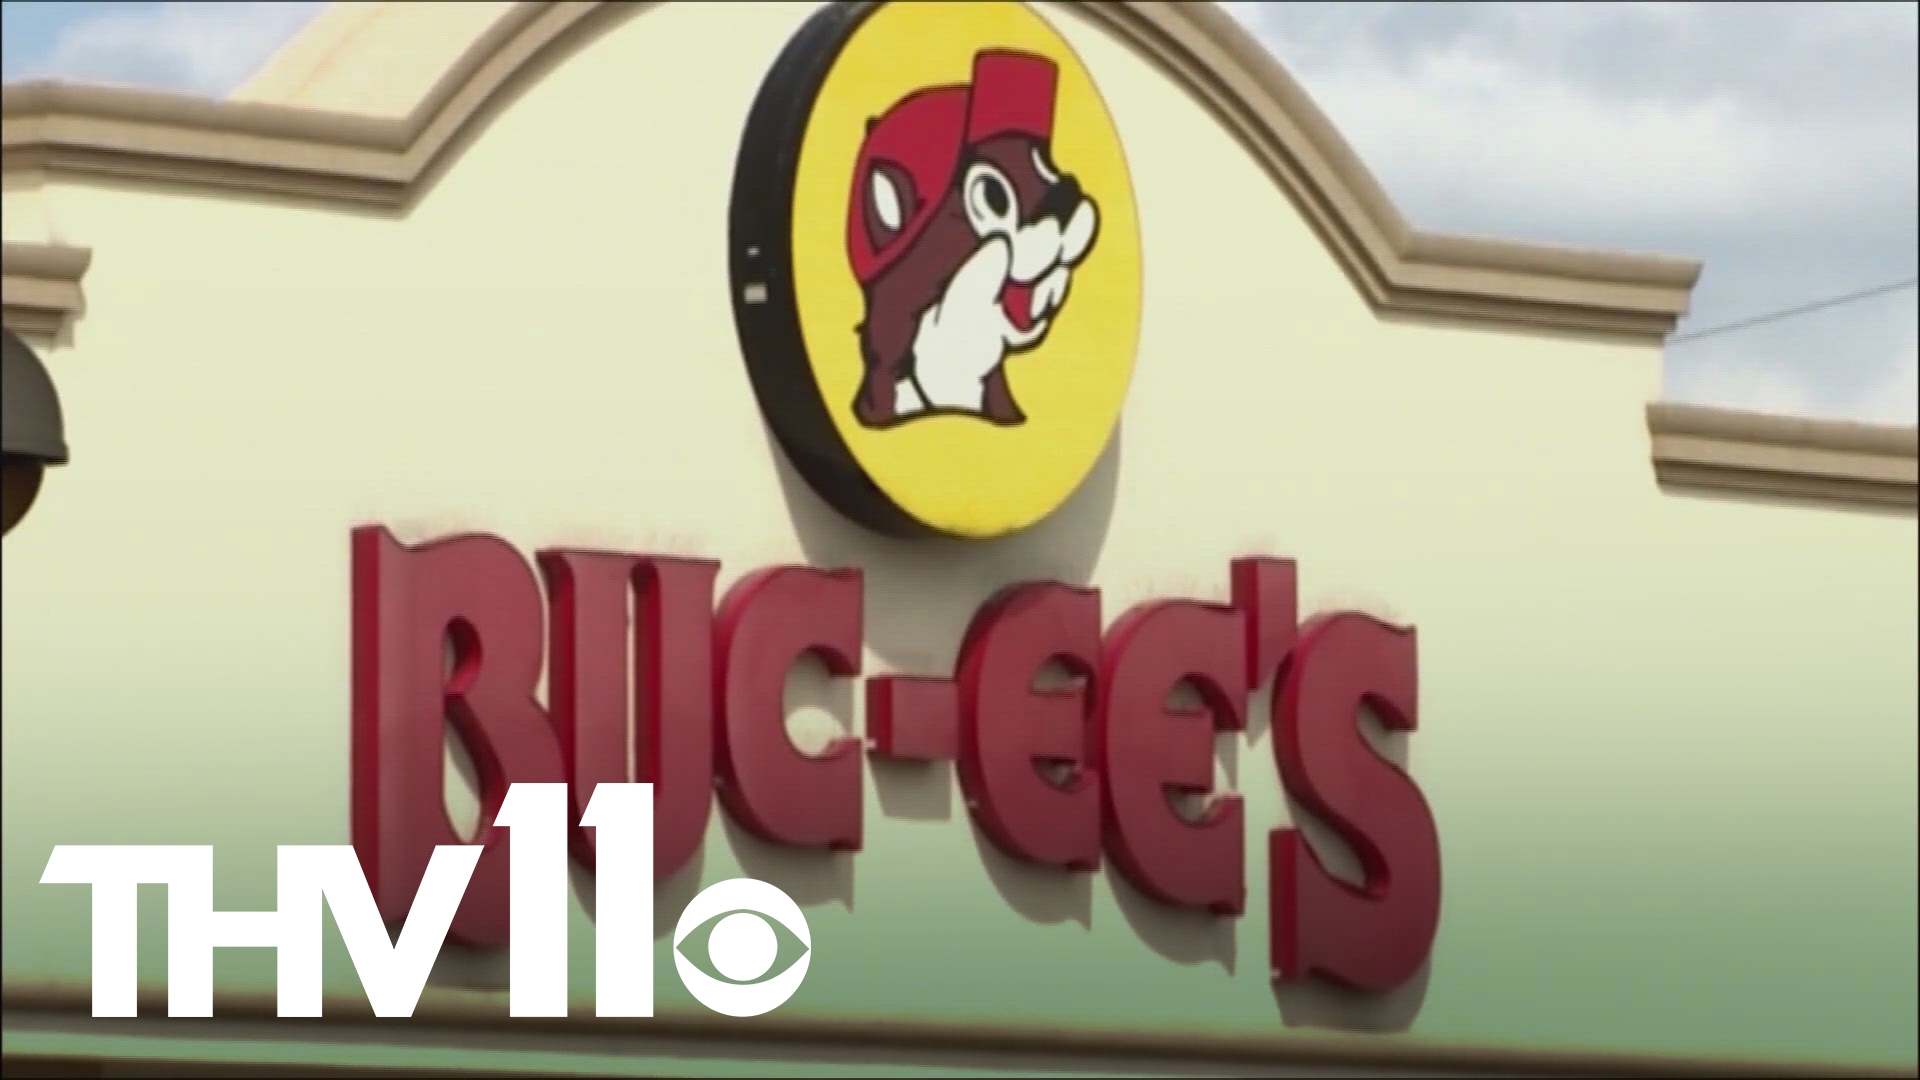 As the City of Benton works to bring Buc-ee's to the community, we're taking a look at officials' plan to ease traffic flow around the popular travel center.